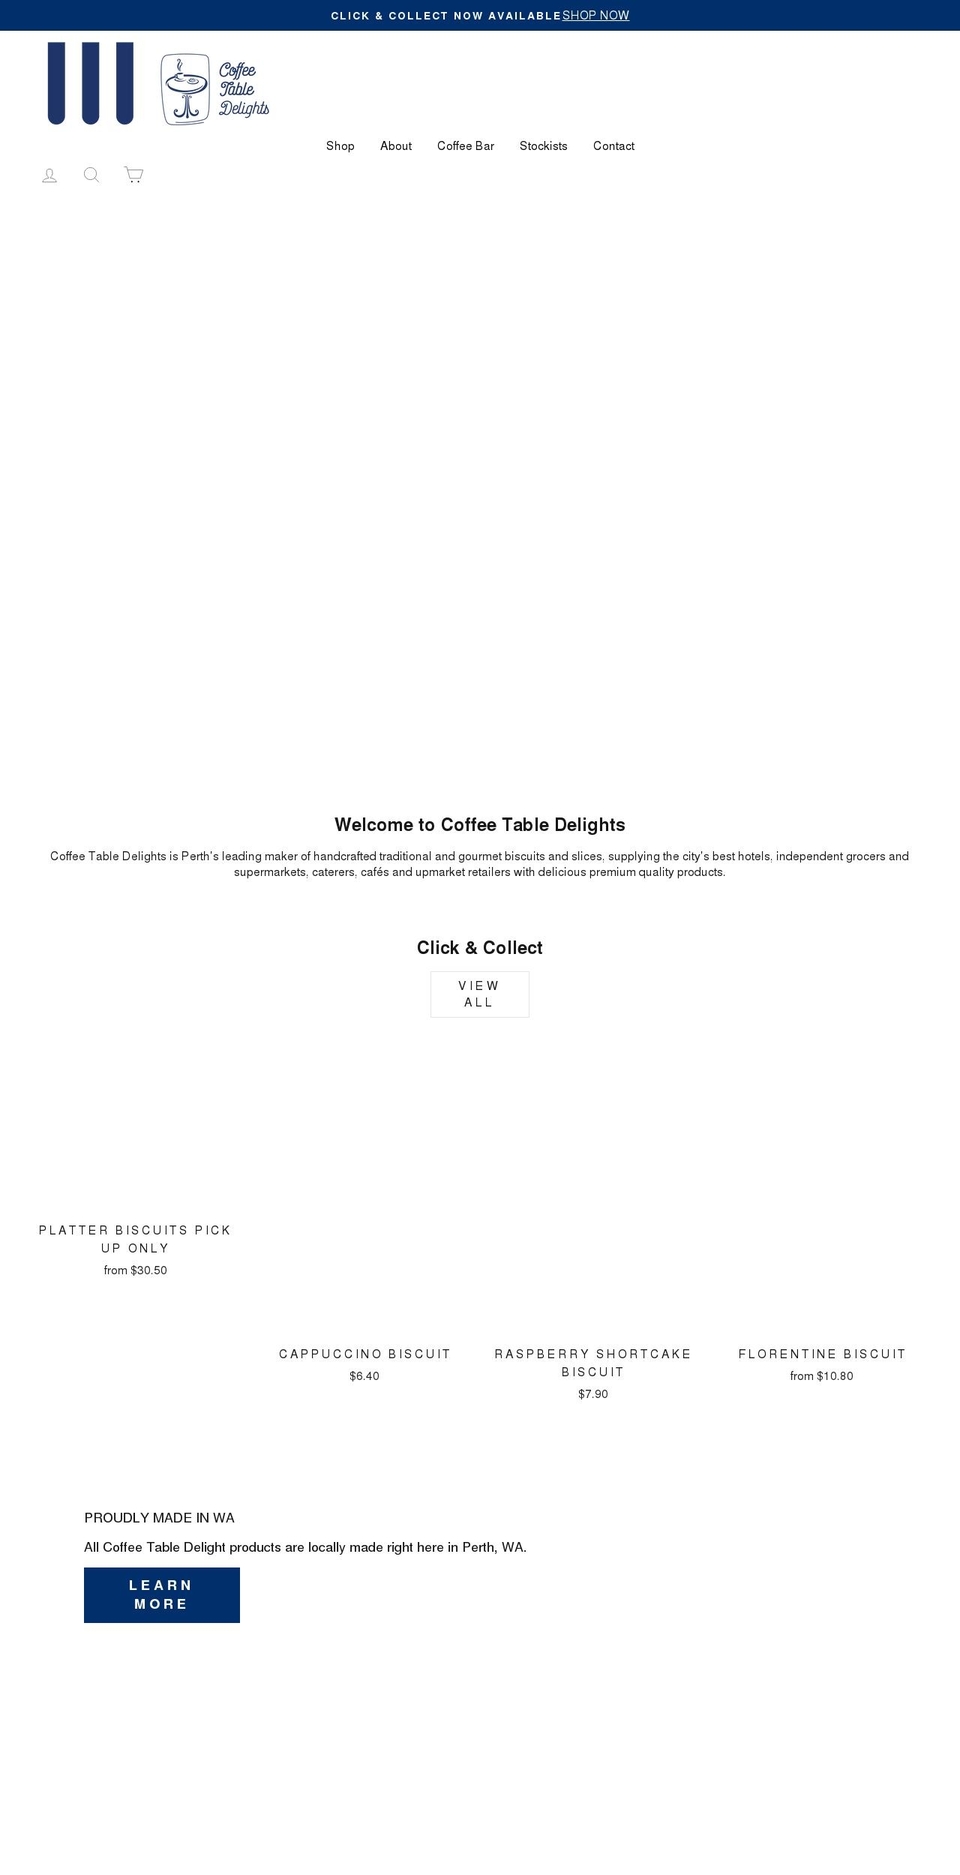 Coffee Shopify theme site example coffeetabledelights.com.au